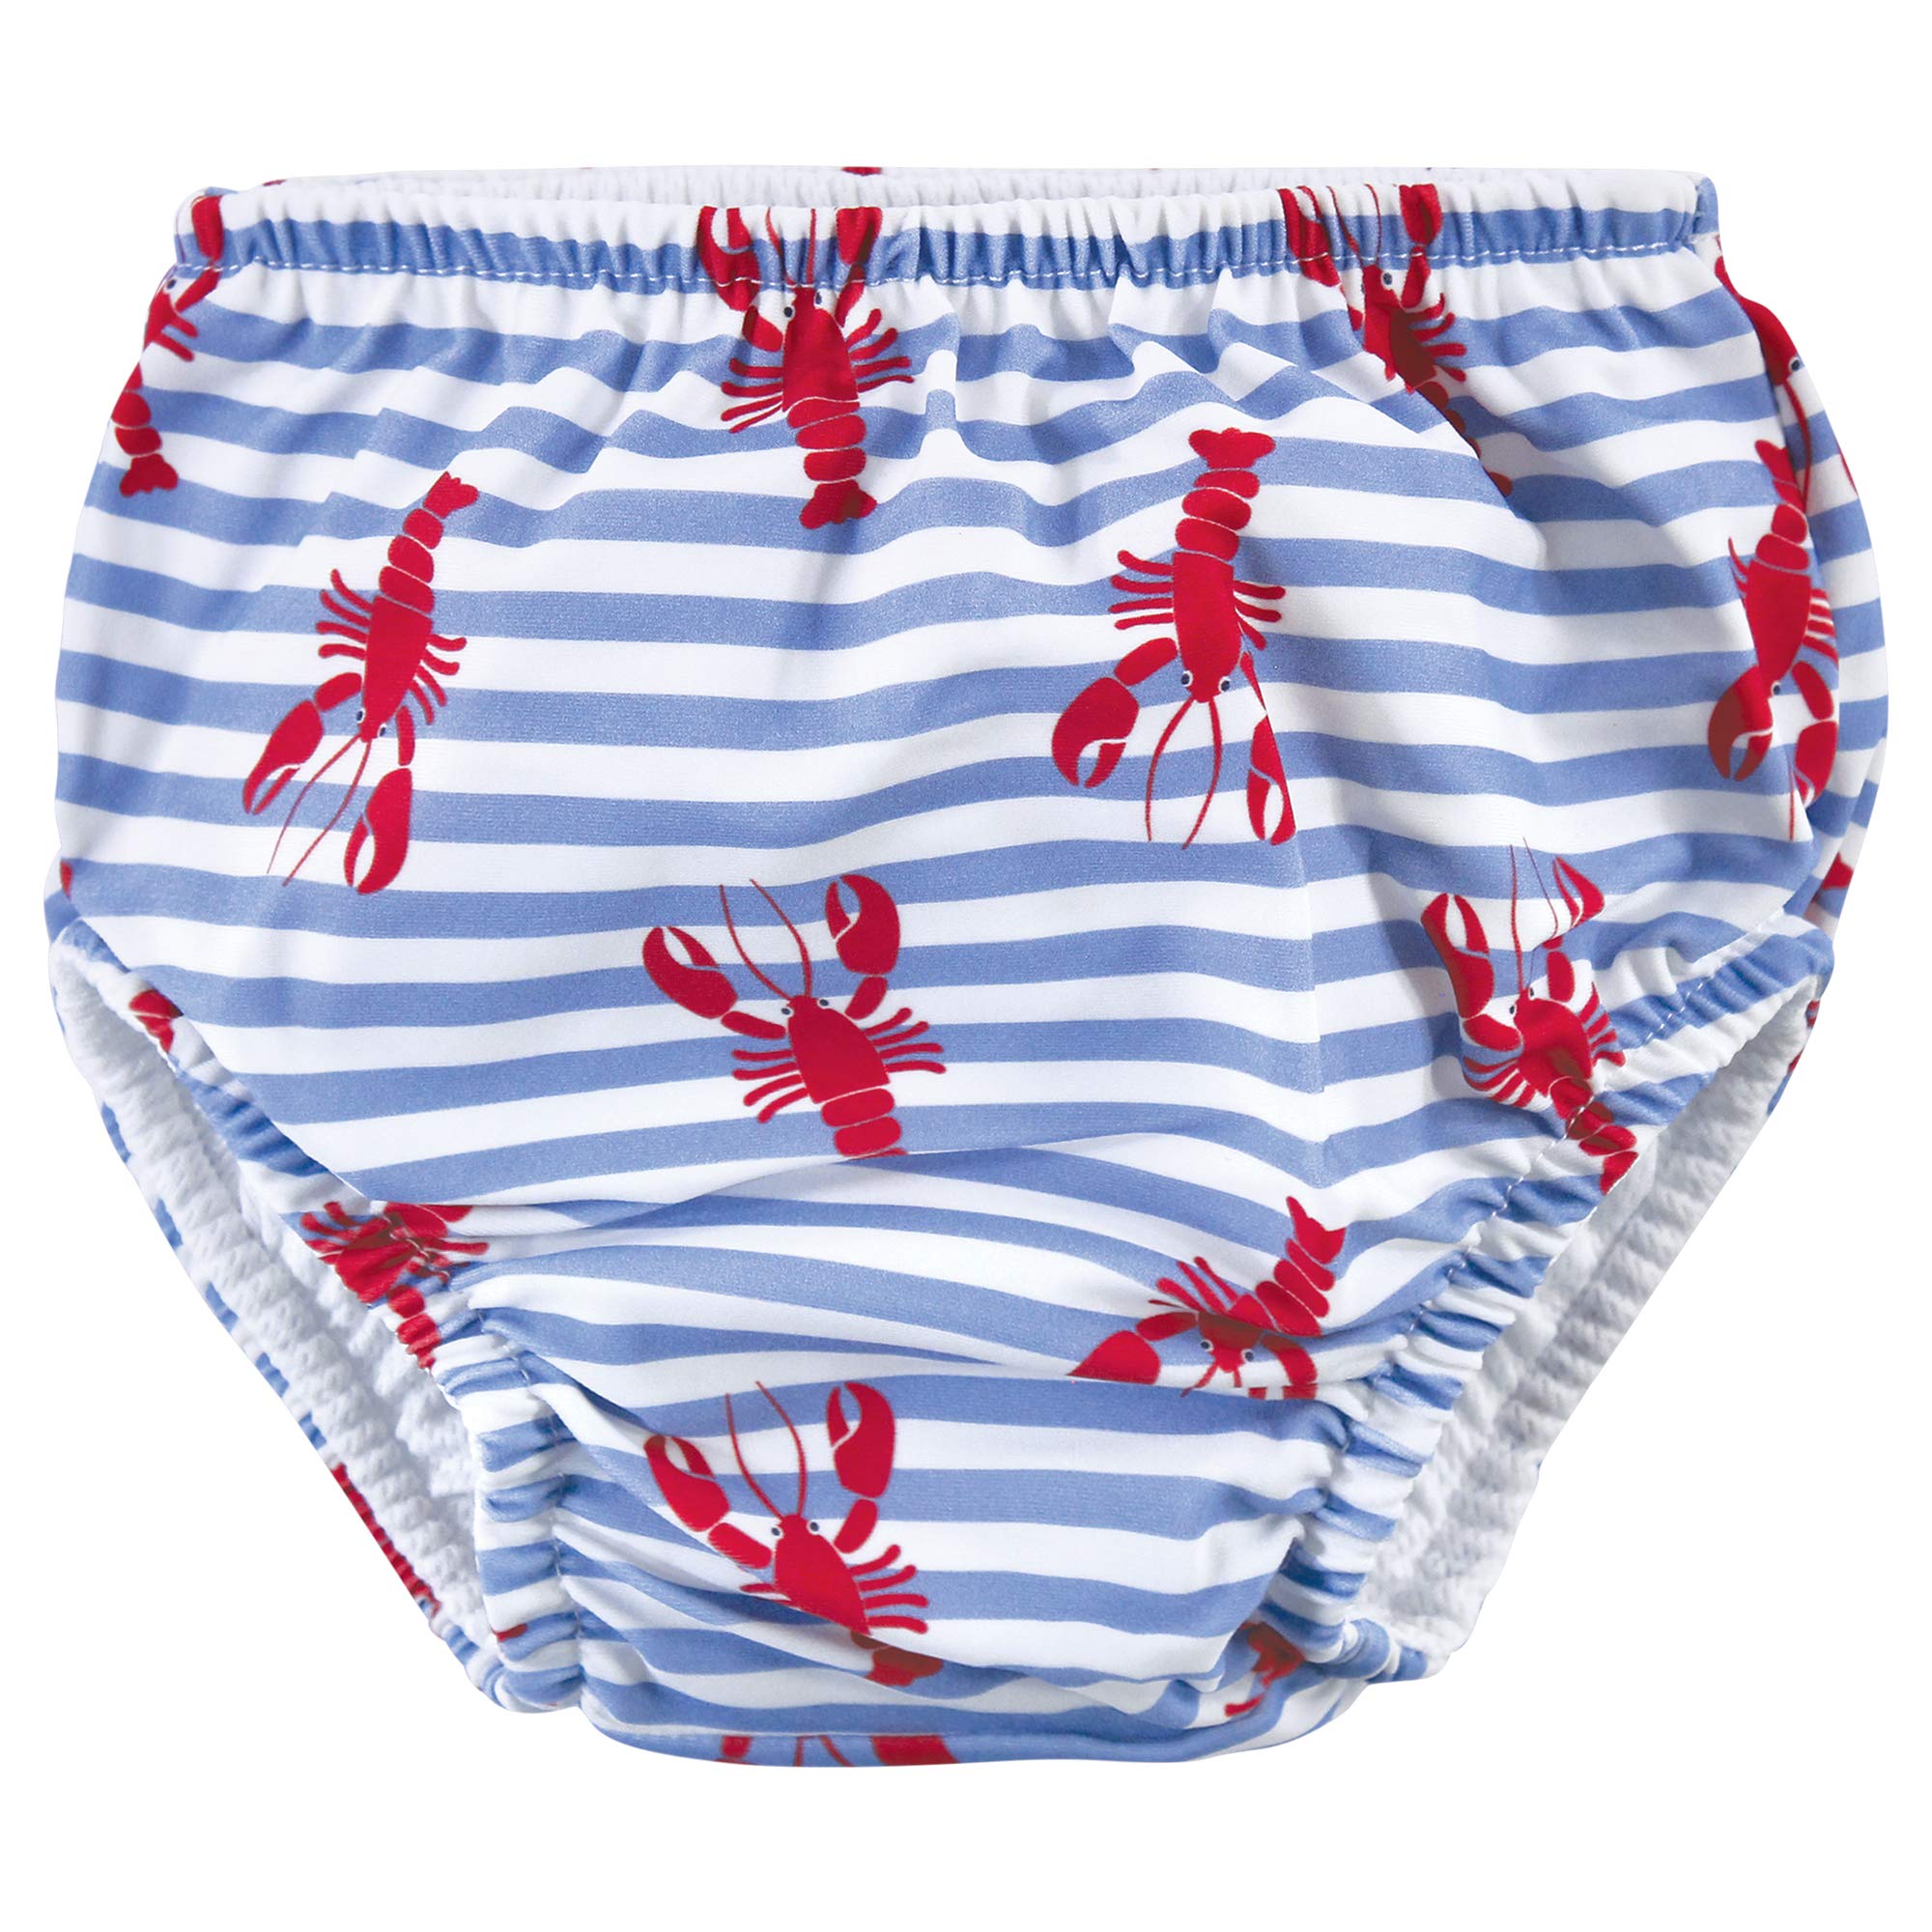 Hudson Baby Unisex Baby Swim Diapers, Anchors, 6-12 Months